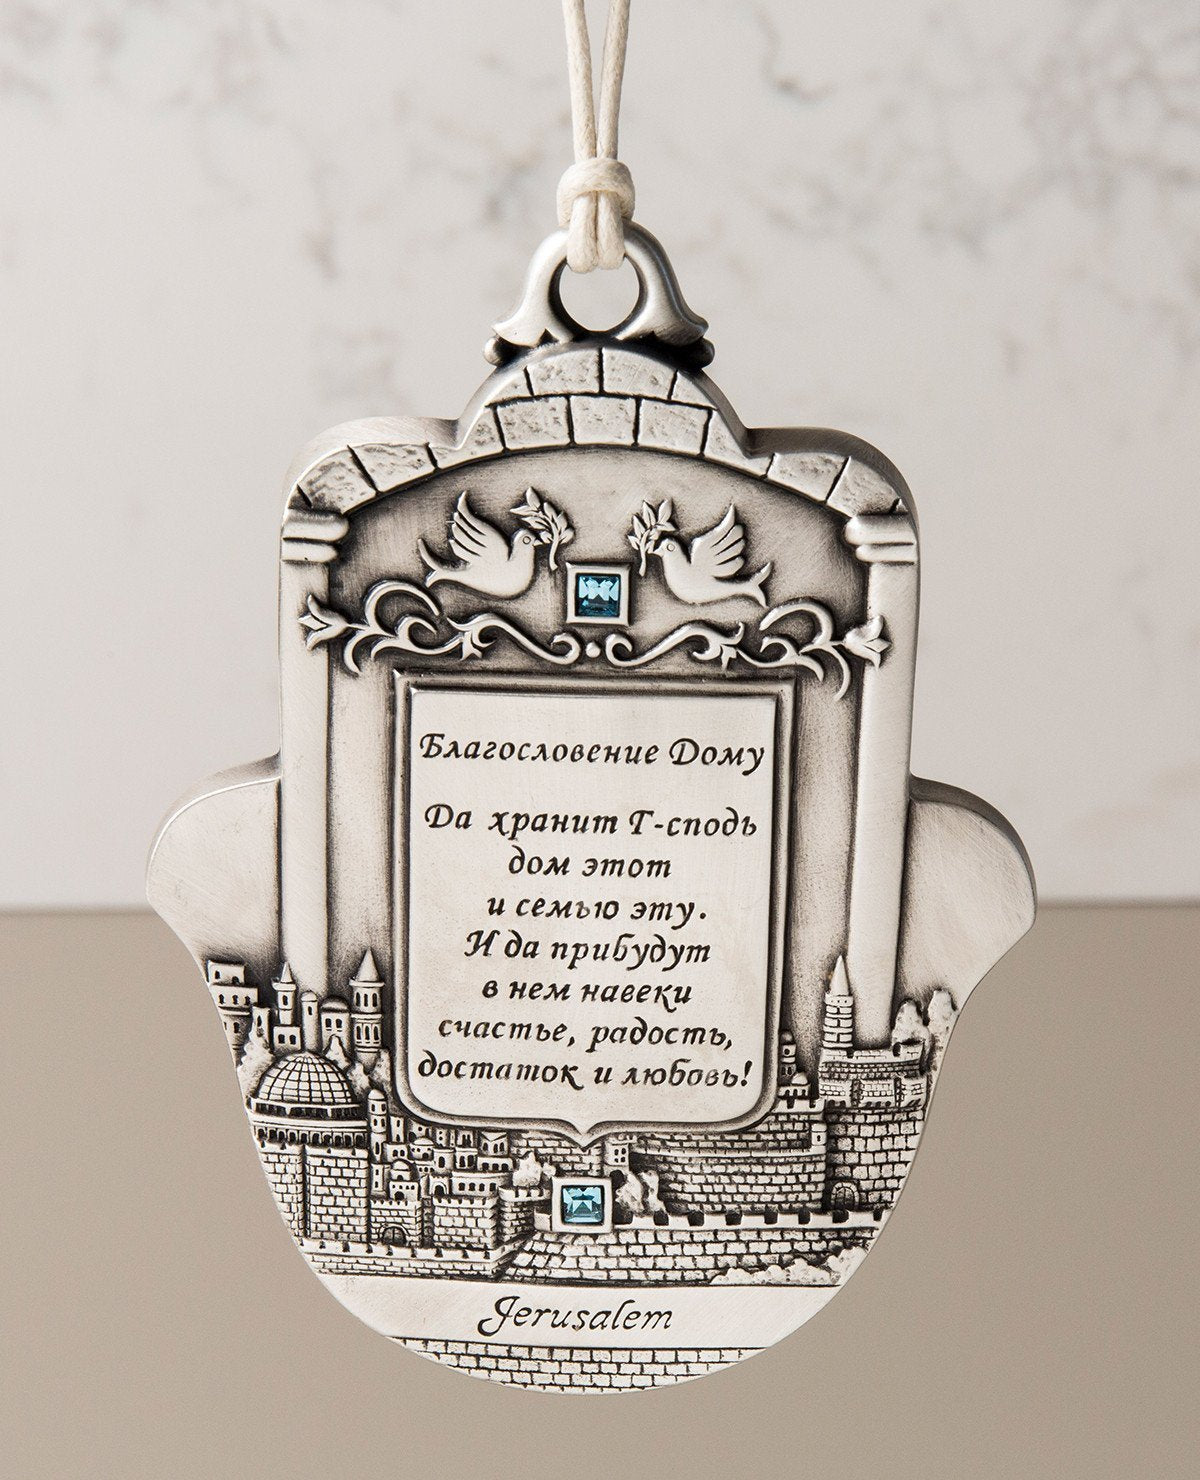 An impressively designed and uniquely decorated Hamsa hanging ornament coated in sterling silver. Decorated with an embossed image of Jerusalem and a pair of peace doves with an olive branch, alongside blessing words of love, joy, laughter and light for the home. Makes a thoughtful and loving gift that will brighten up any house. The Hamsa is embedded with azure Swarovski crystals and a natural colored faux leather string. 
Additional languages available: English and Hebrew.  Length: 13 cm  Width: 9 cm